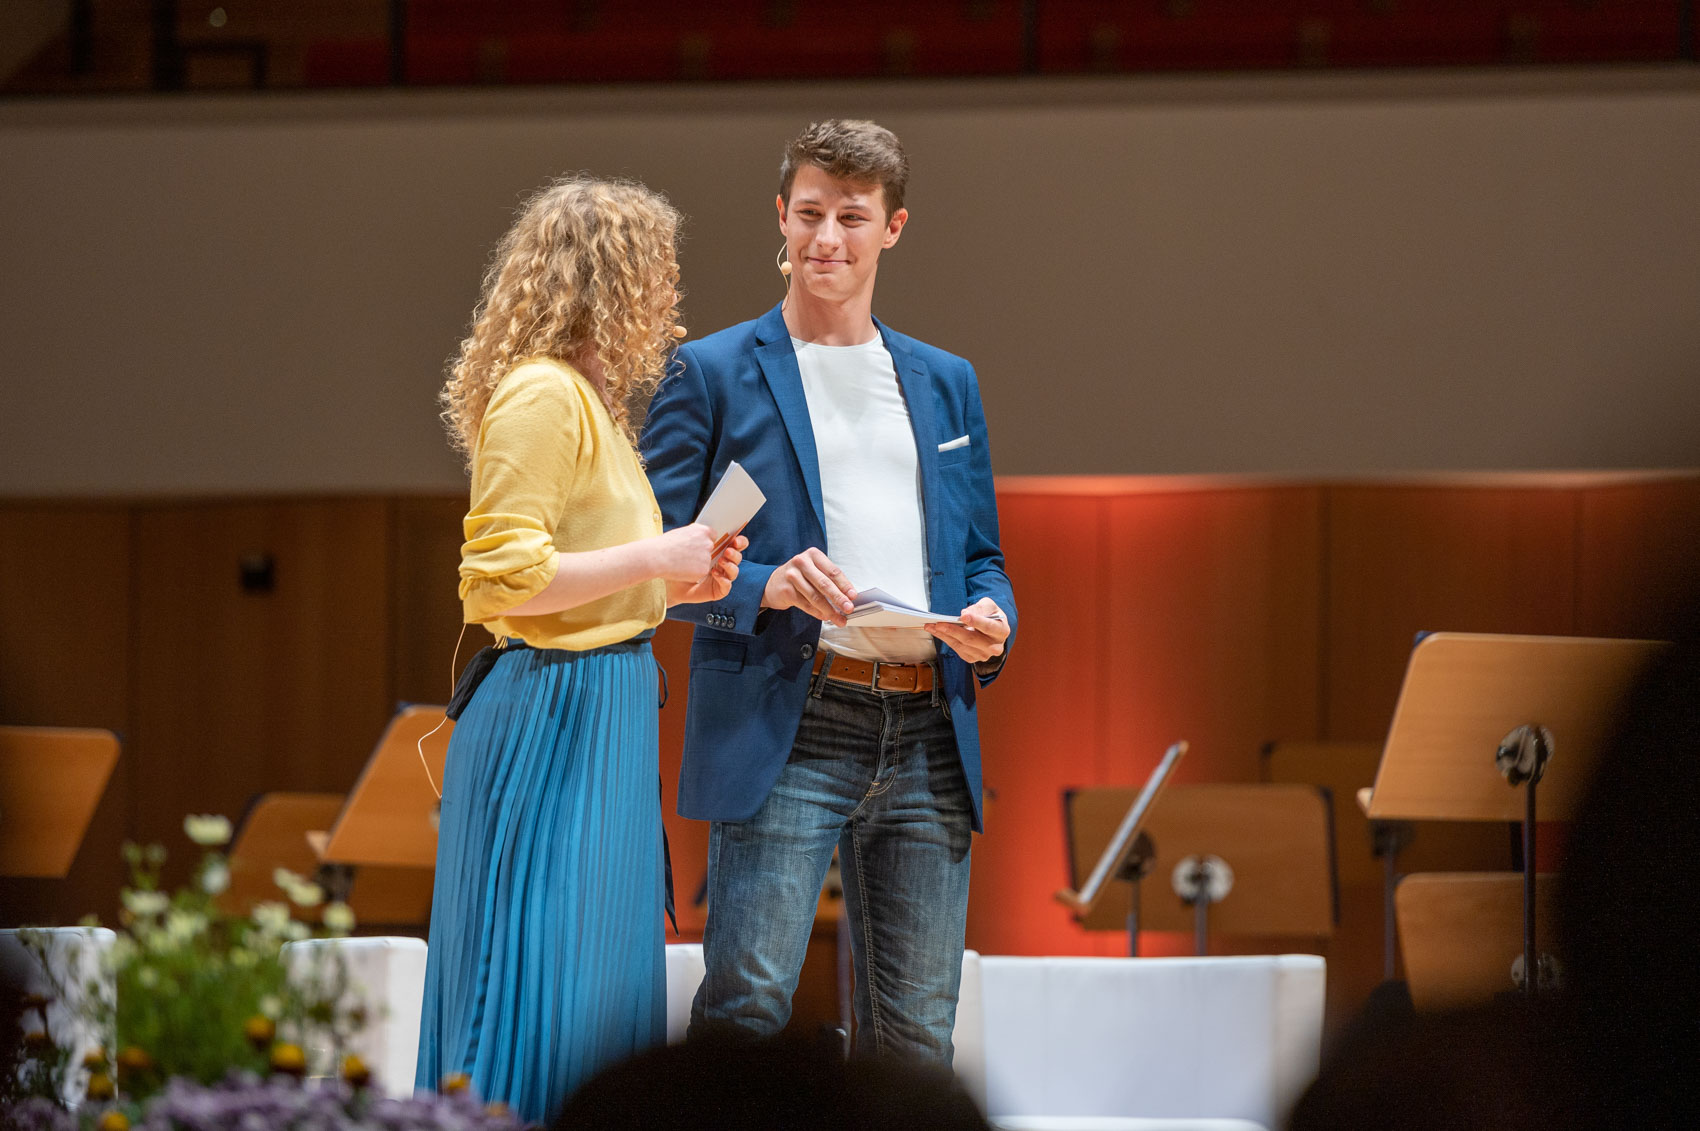 As moderator, Jonas and his fellow student Cora Günther welcomed the new students of the class of 2022.